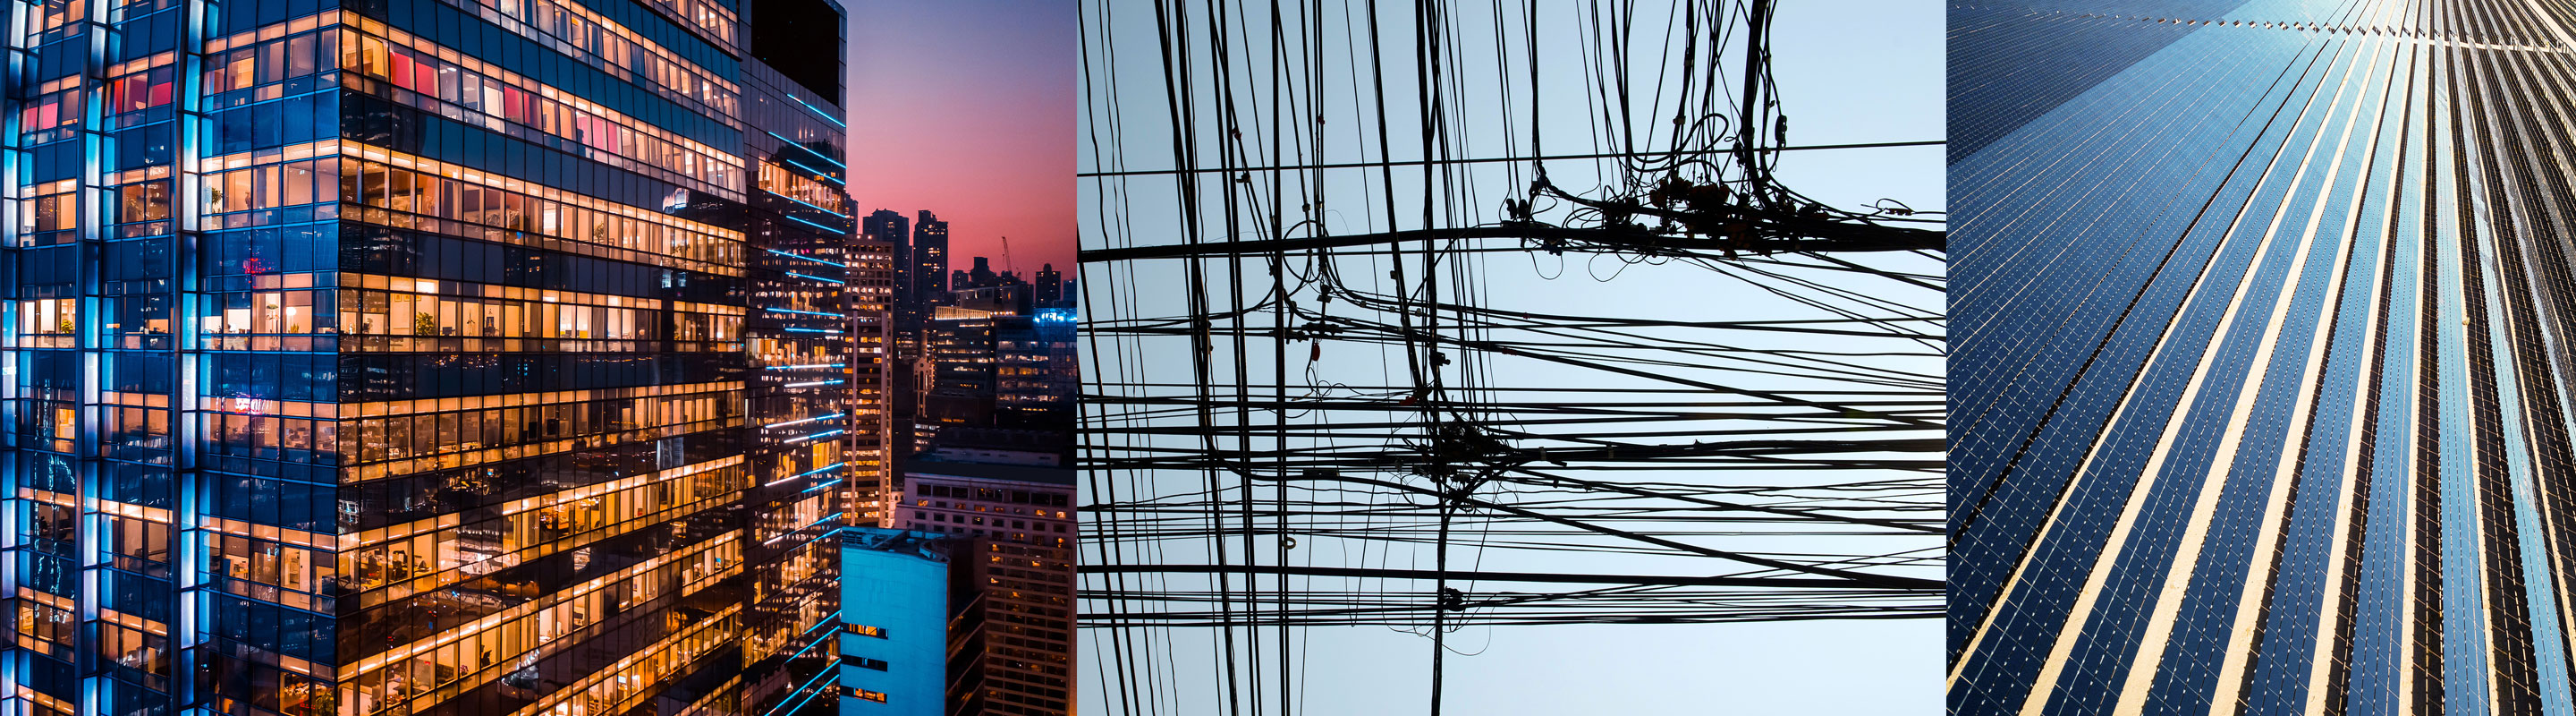 Three images - city buildings, electrical wires, and solar panels